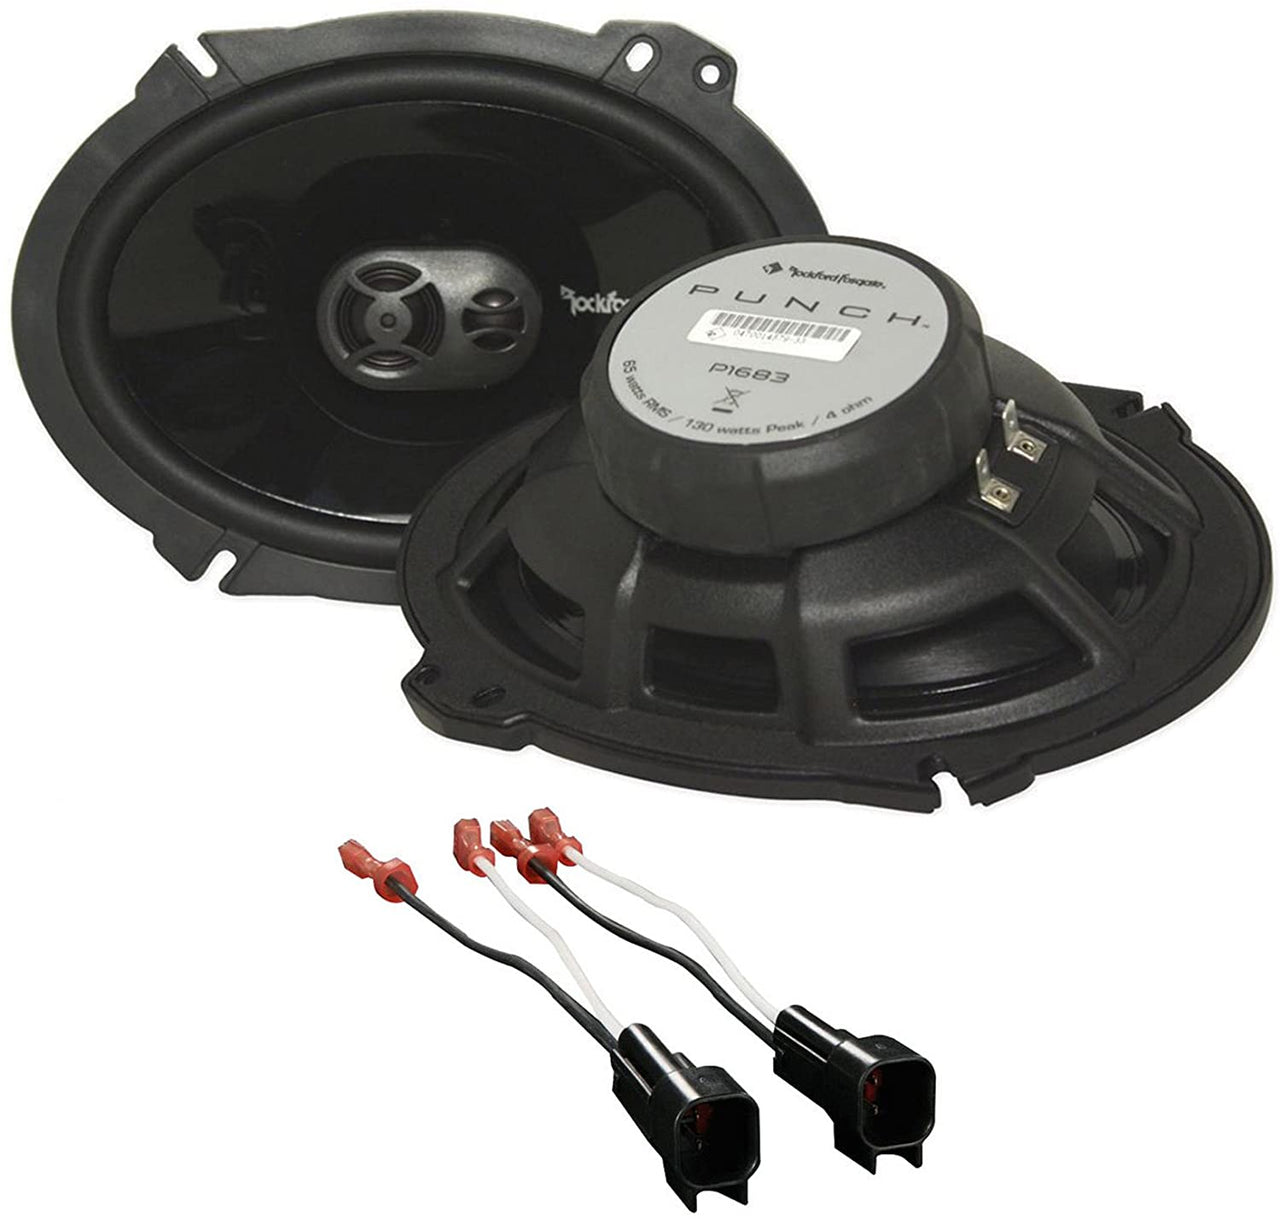 Rockford Fosgate P1683 6x8" Rear Speaker Replacement Kit & Absolute USA AS5600 Speaker Harness for 2005-2006 Ford Mustang